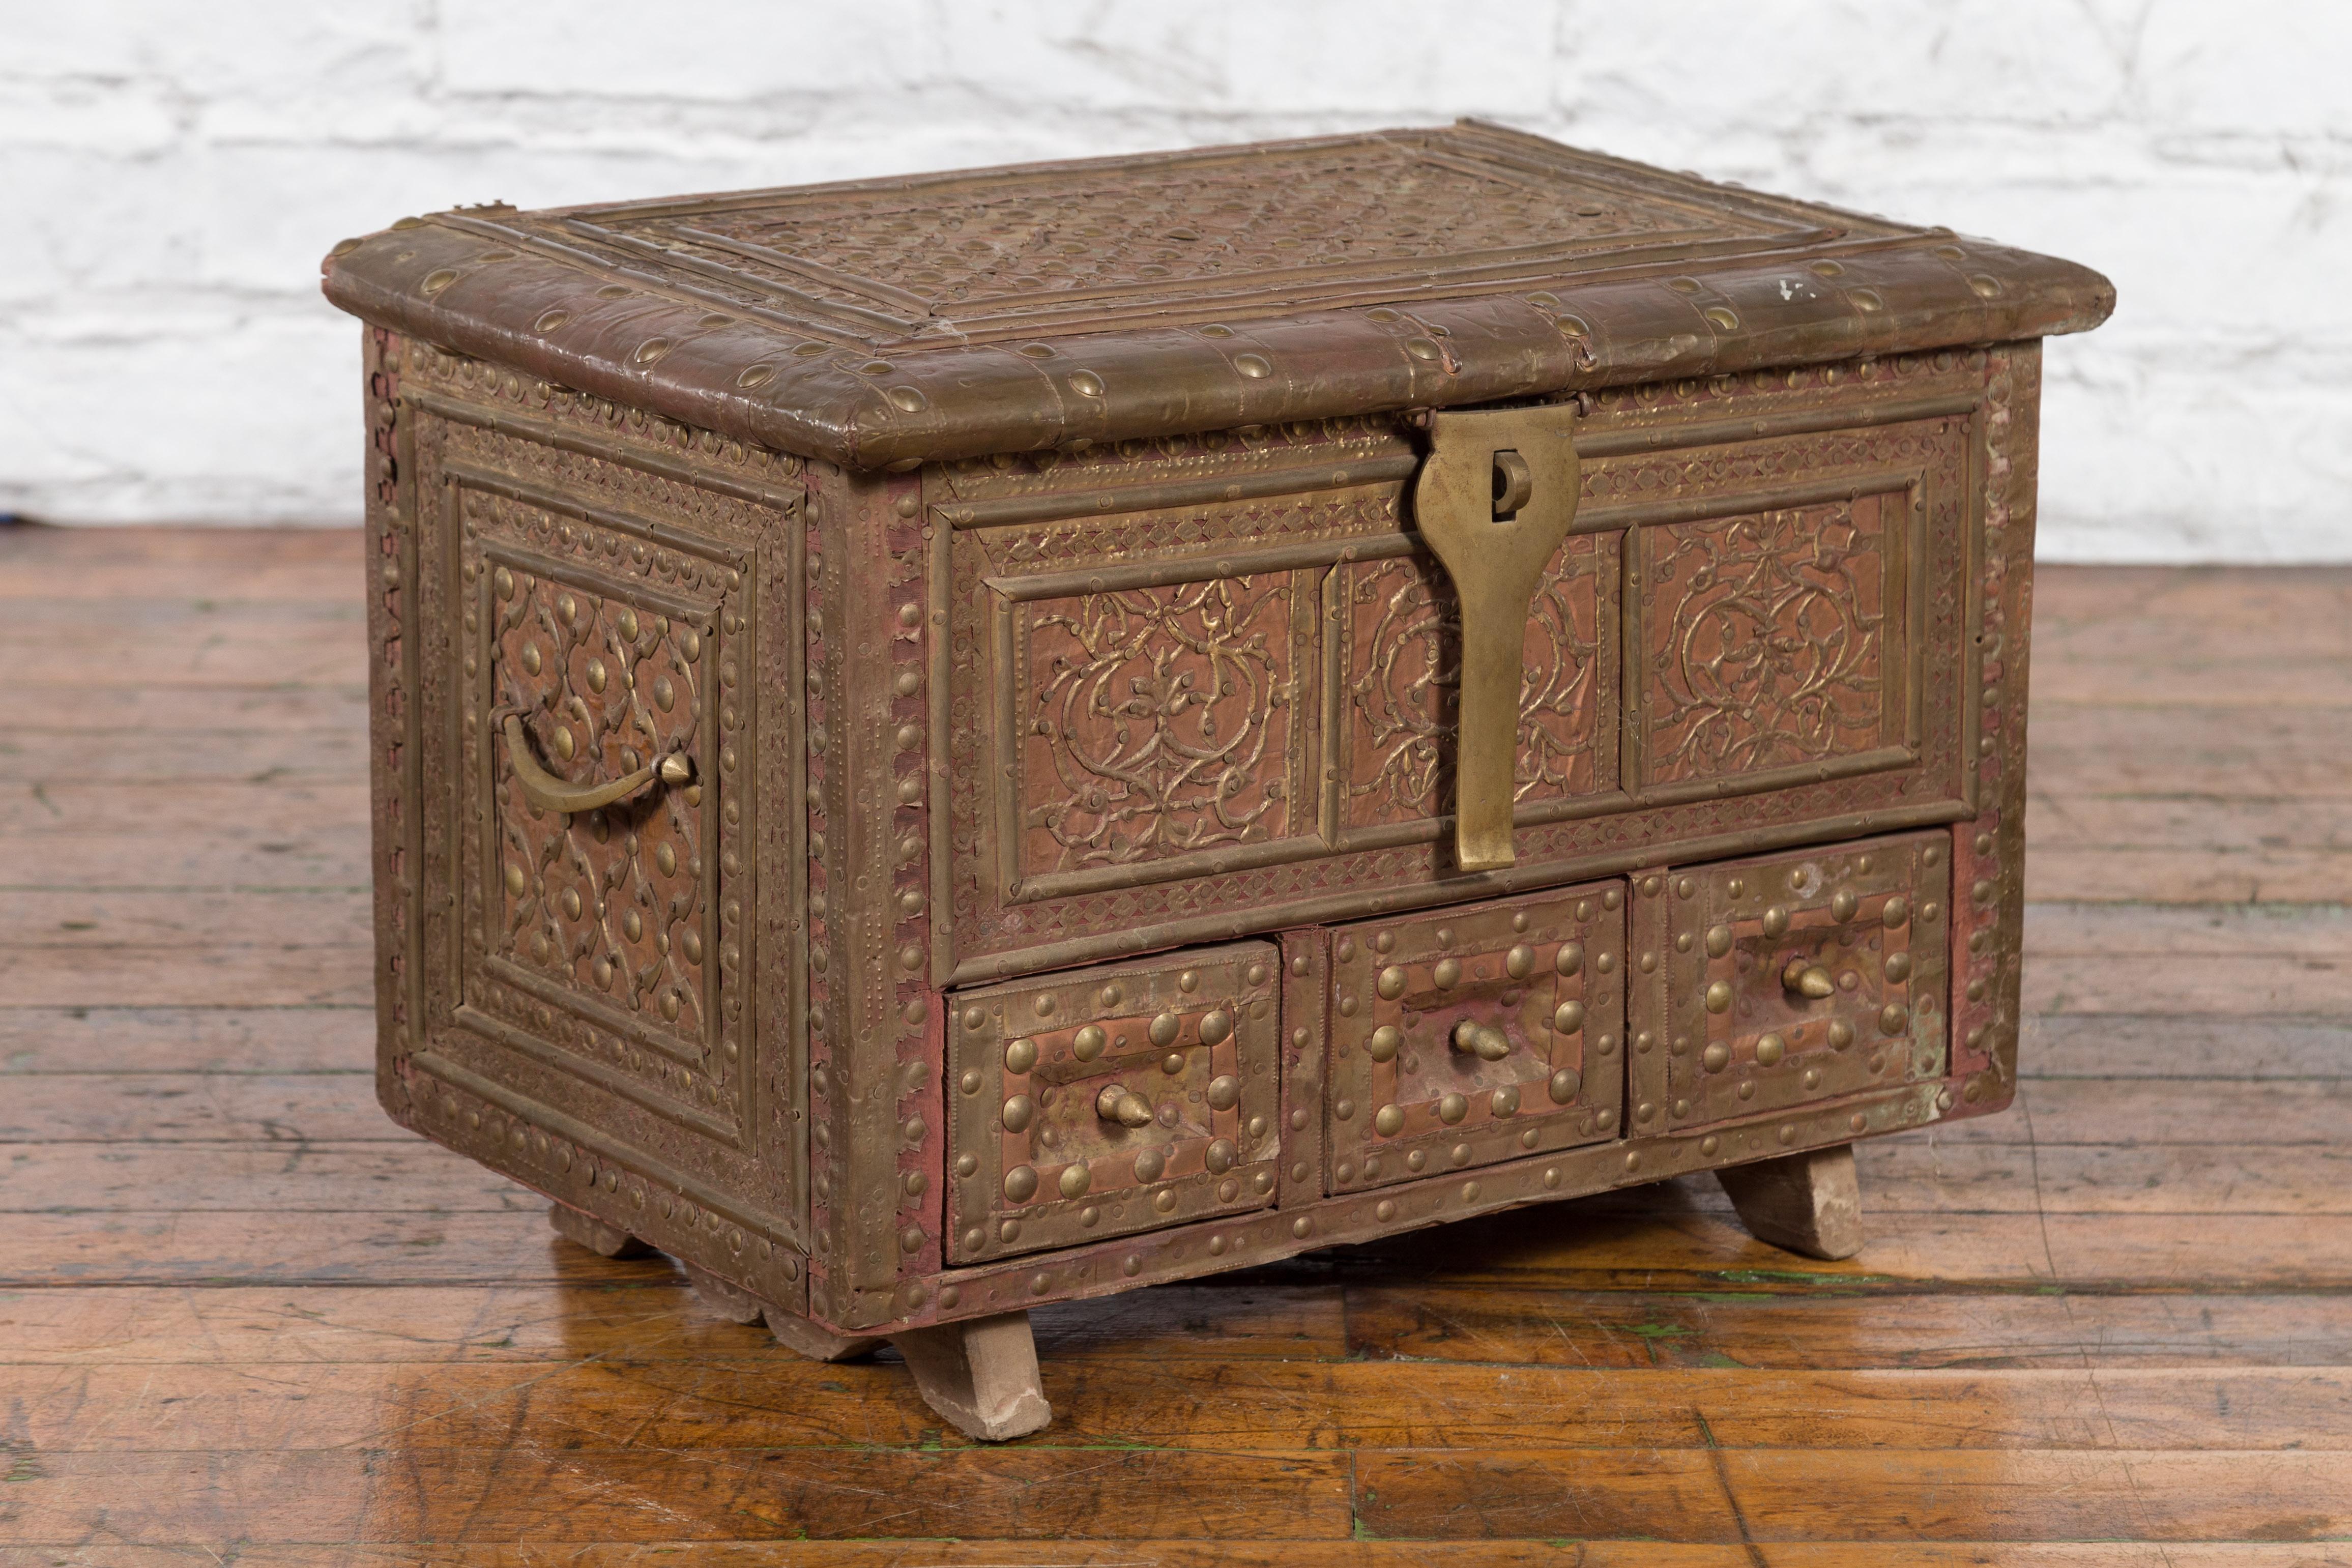 An Indian brass over wood bridal chest from the 19th century, with hand-tooled décor. Created in India during the 19th century, this bridal chest features a rectangular lid with hand-tooled brass décor, opening to reveal a convenient storage space.